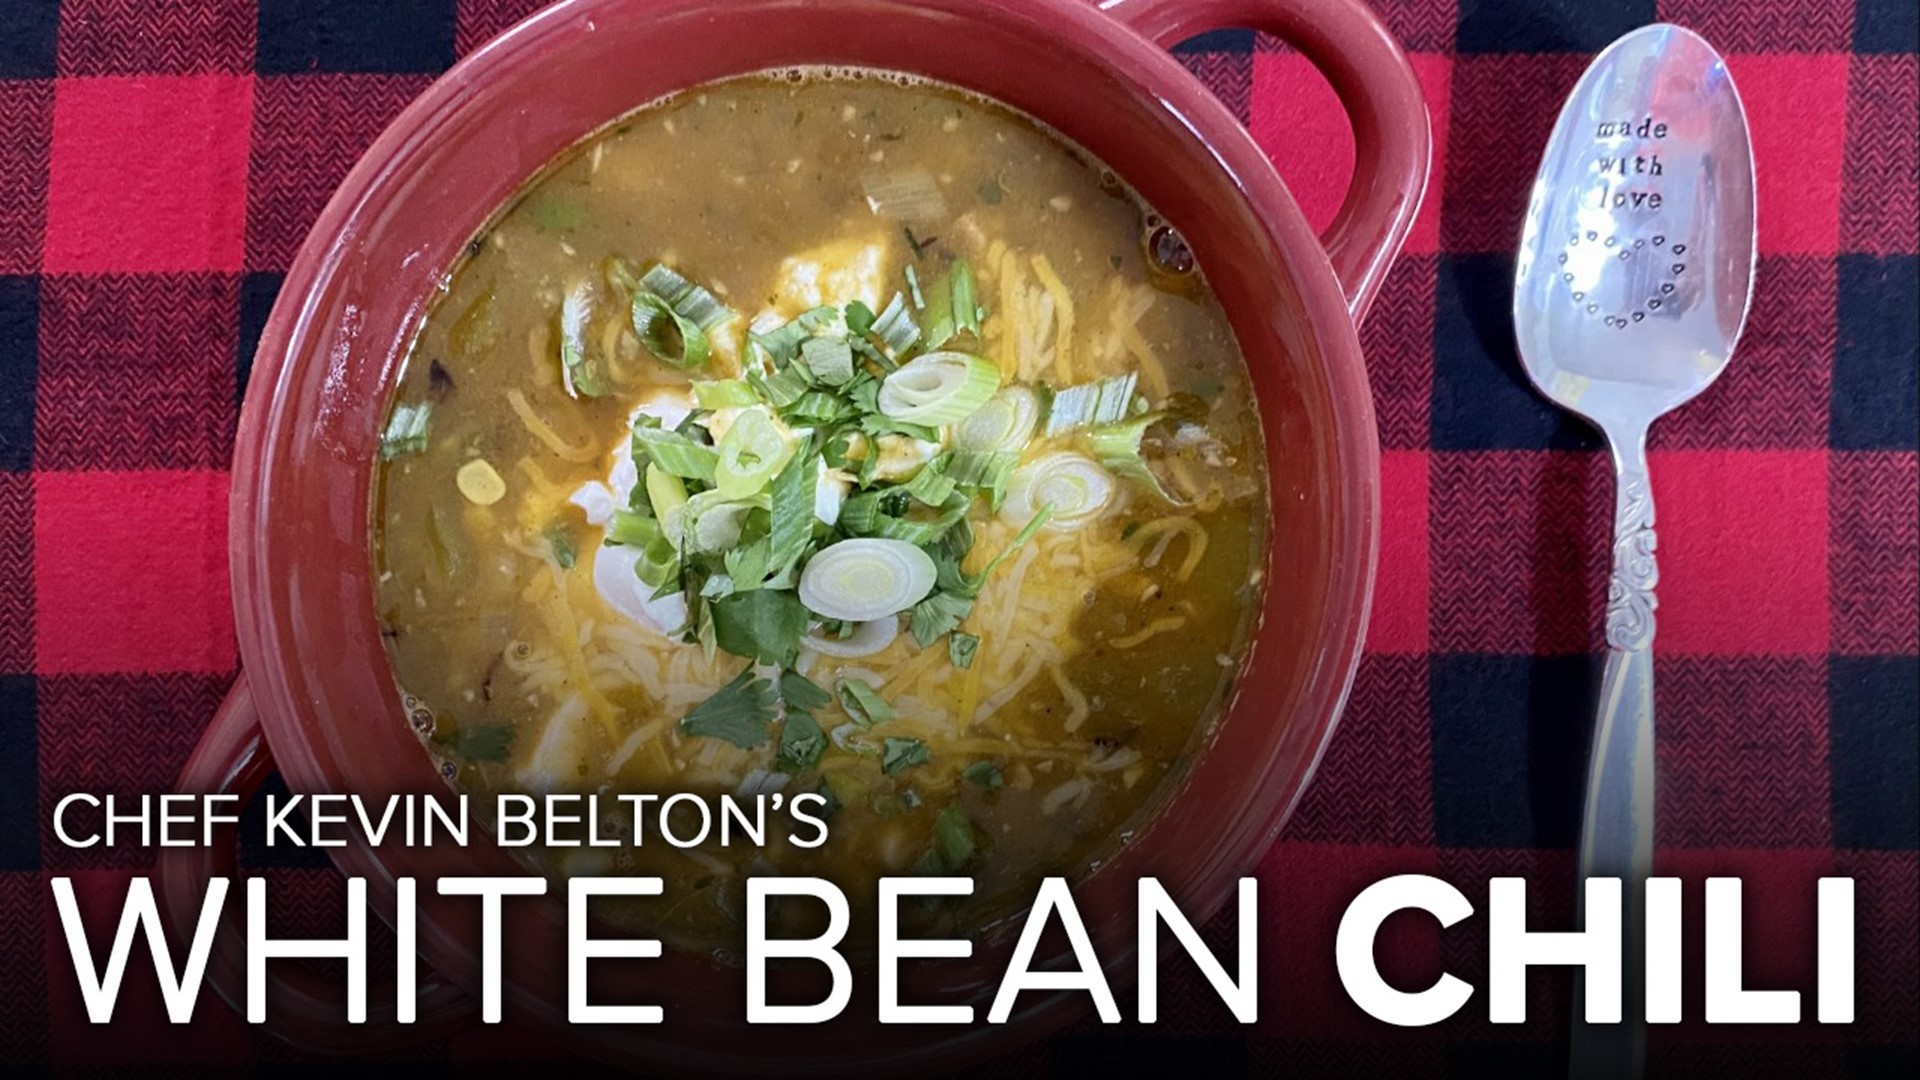 The first week of October is National Chili Week! So we're celebrating with a delicious White Bean Chili, perfect for when the weather gets a little cooler.